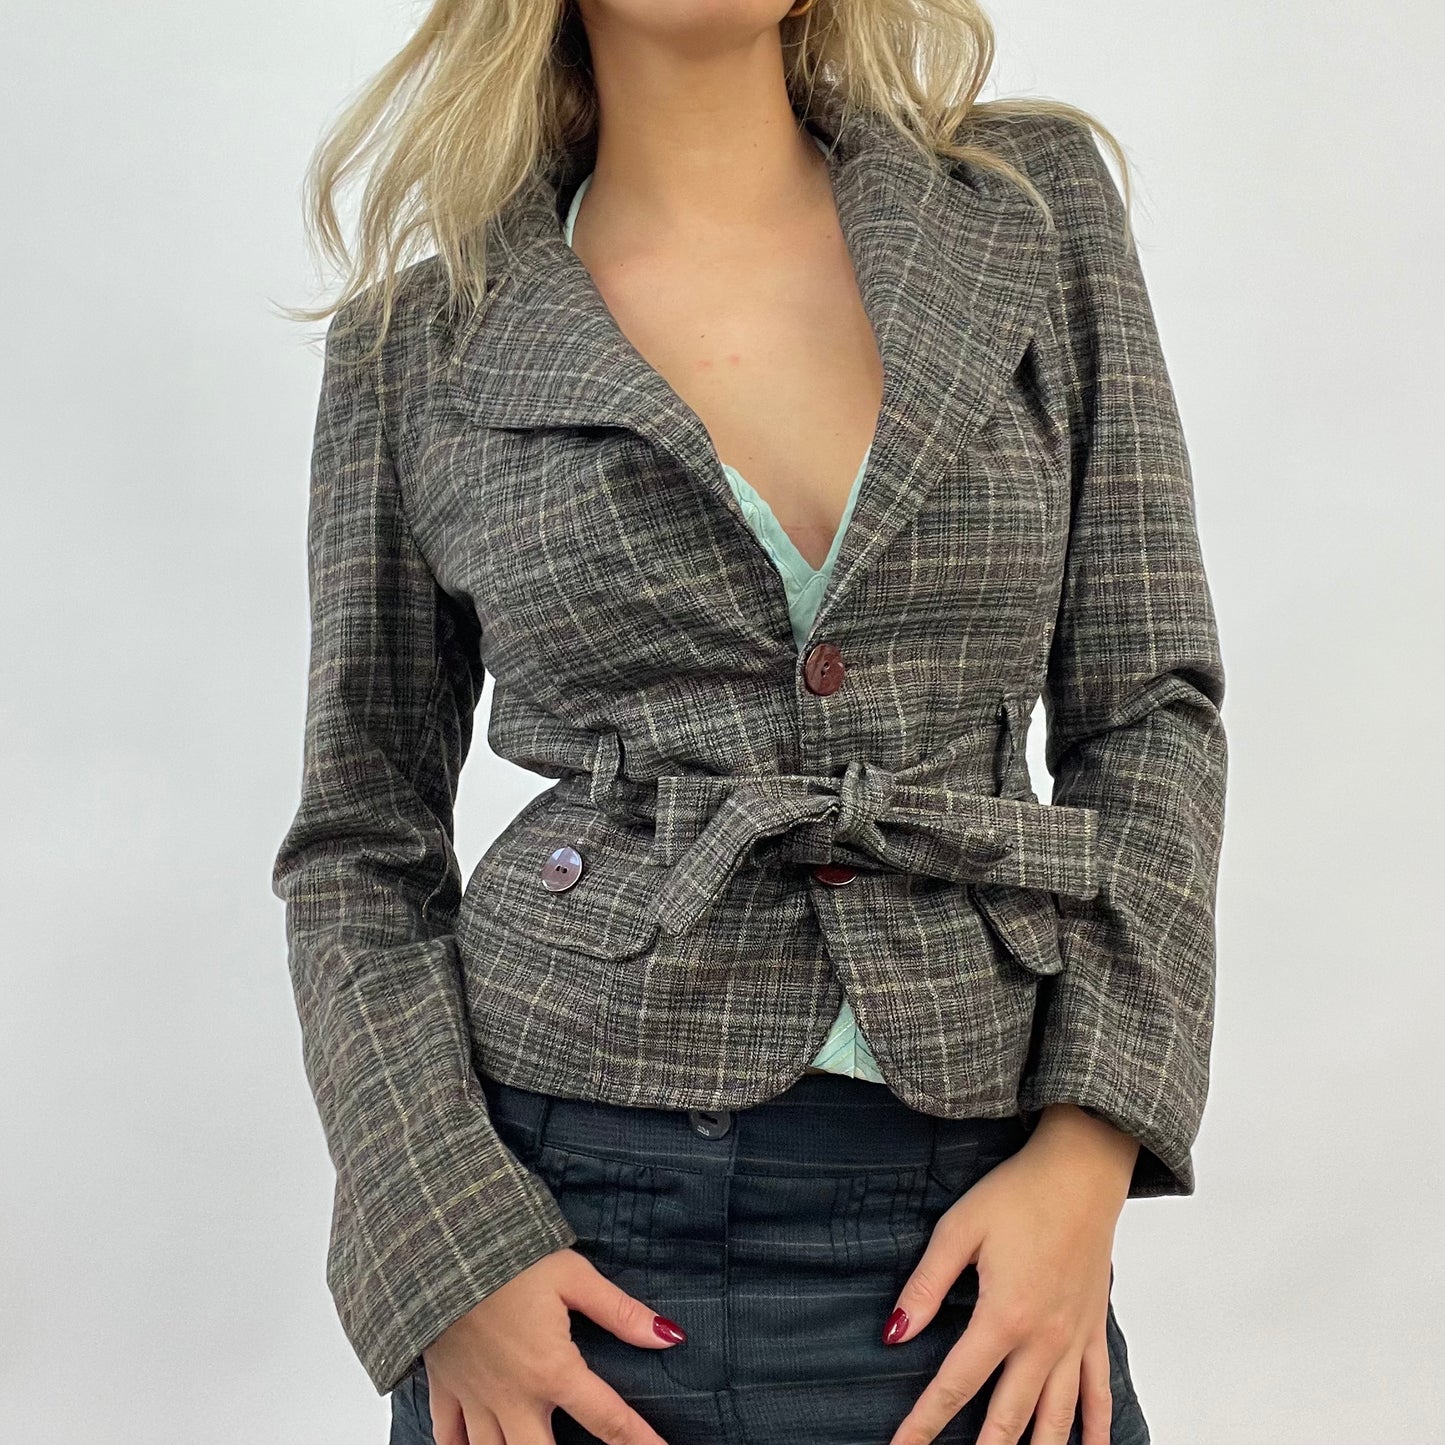 CORPCORE DROP | small brown checkered plaid blazer with bow